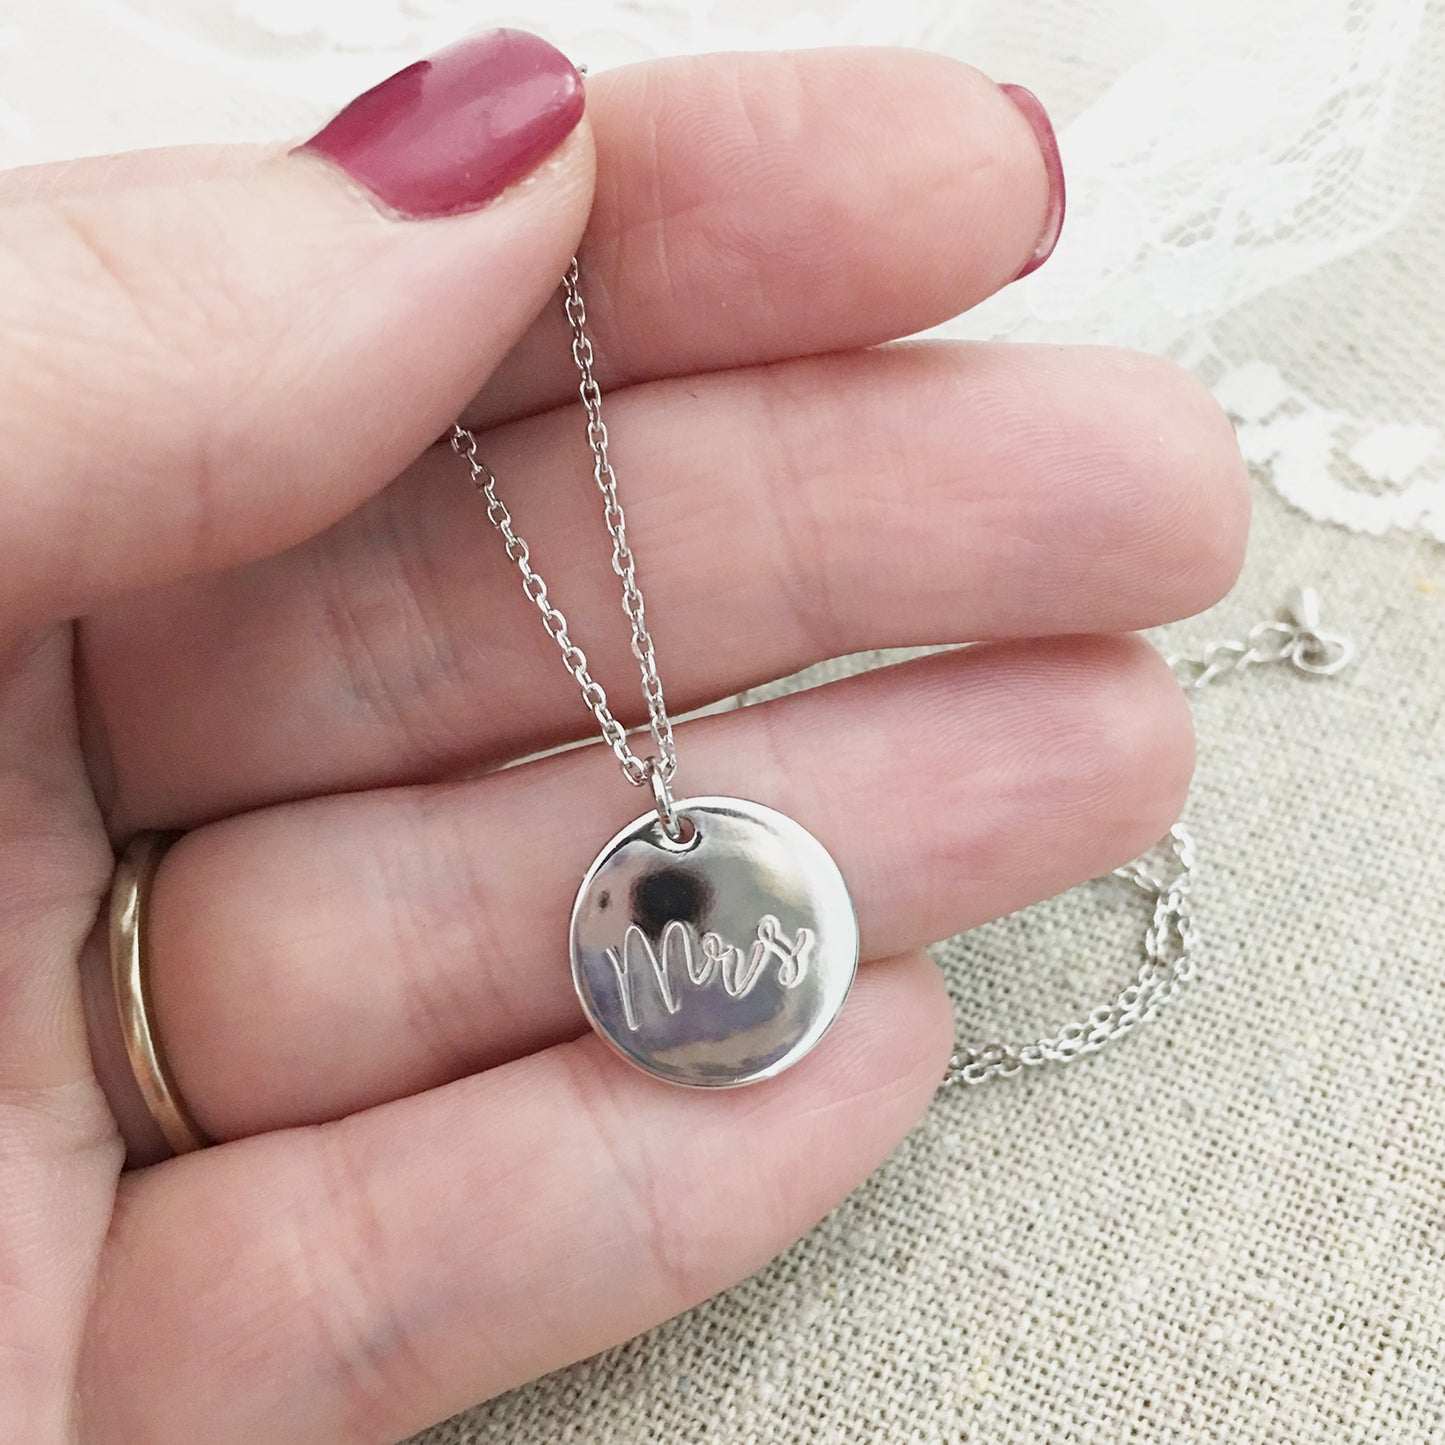 Mrs Stamped Disc Necklace